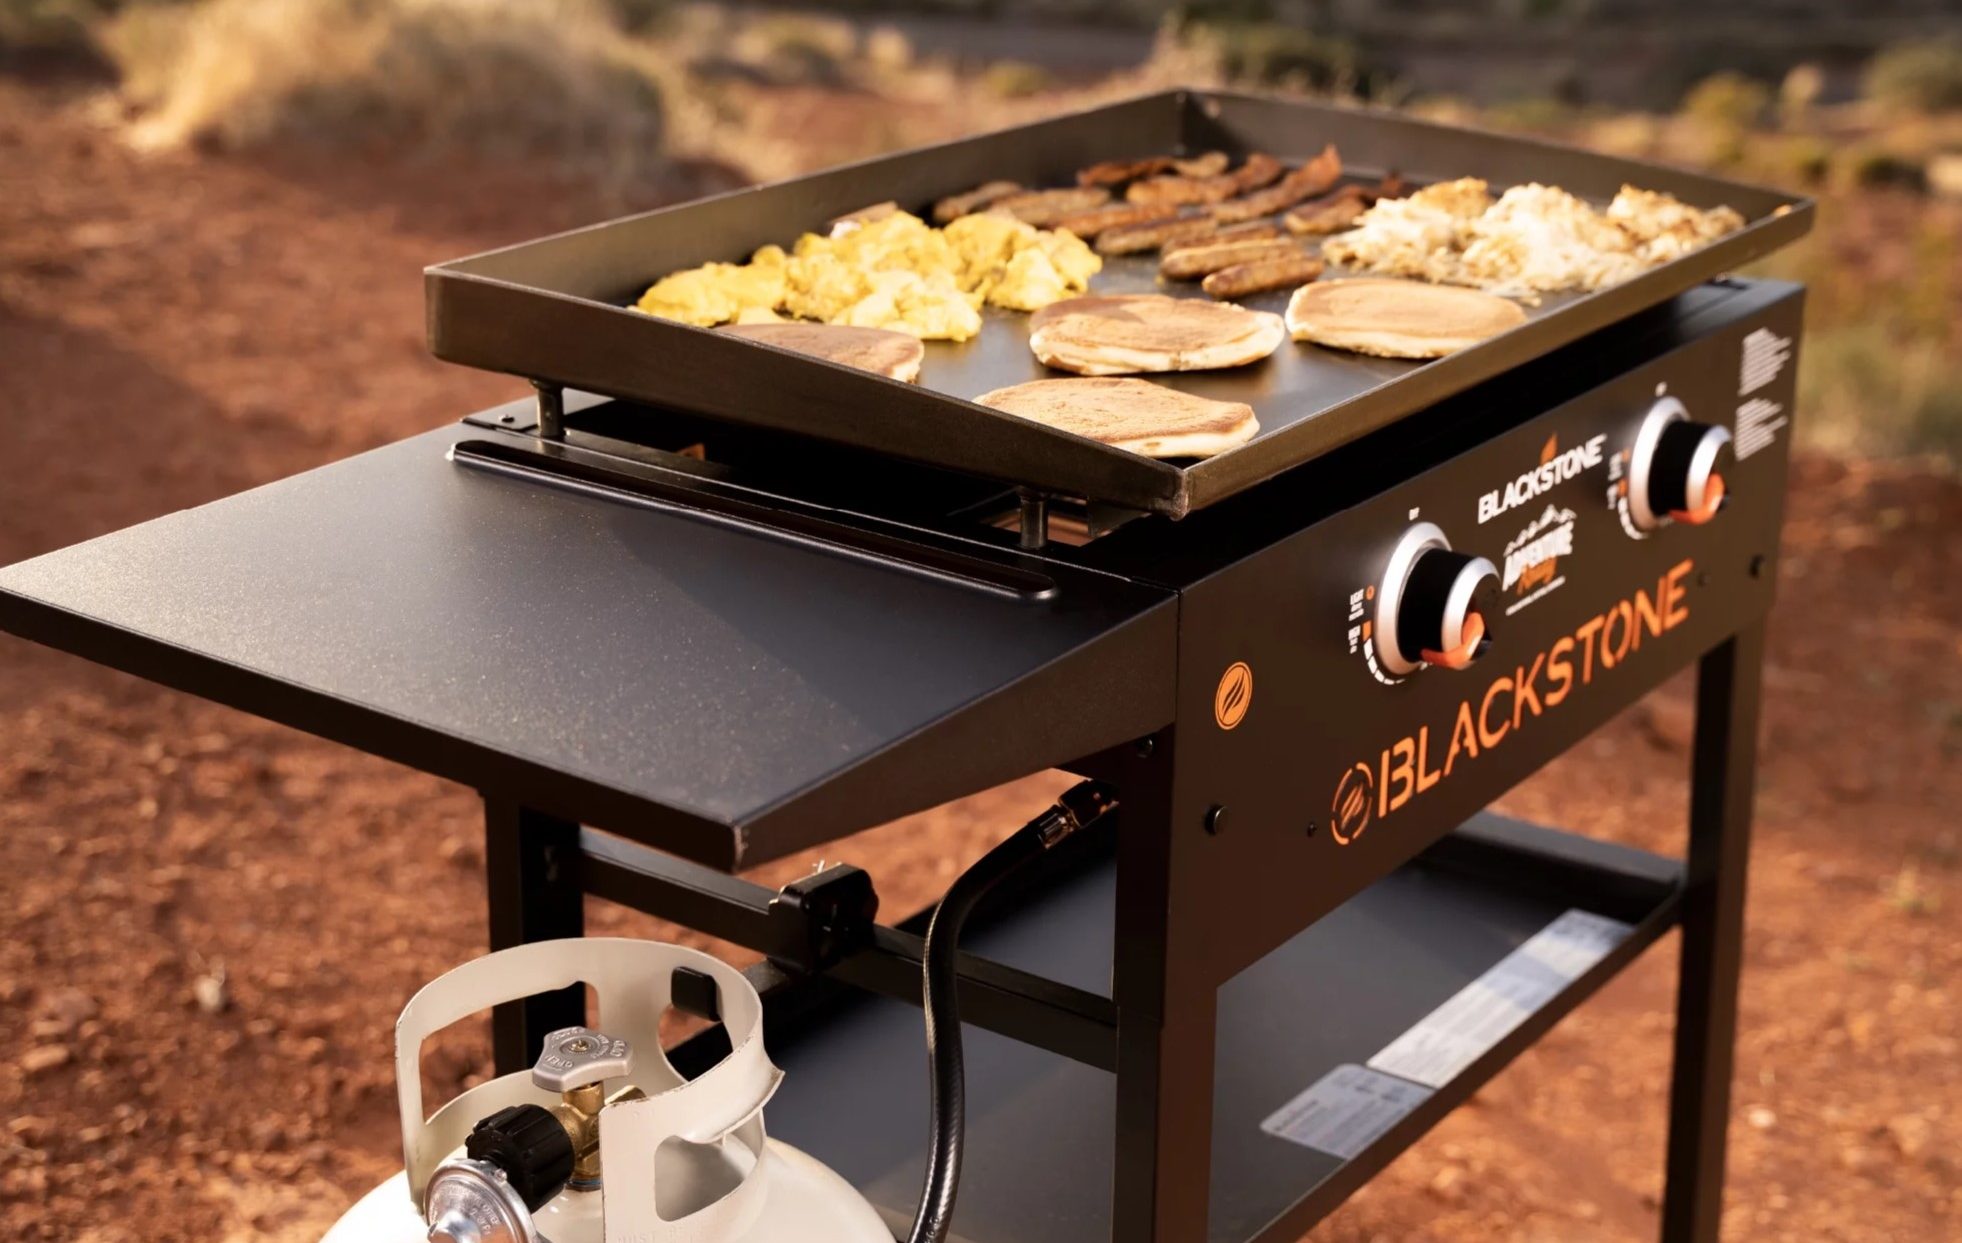 https://www.themanual.com/wp-content/uploads/sites/9/2023/10/Blackstone-Griddle-two-burner-with-breakfast-cooking-e1697655186282.jpg?fit=1962%2C1243&p=1